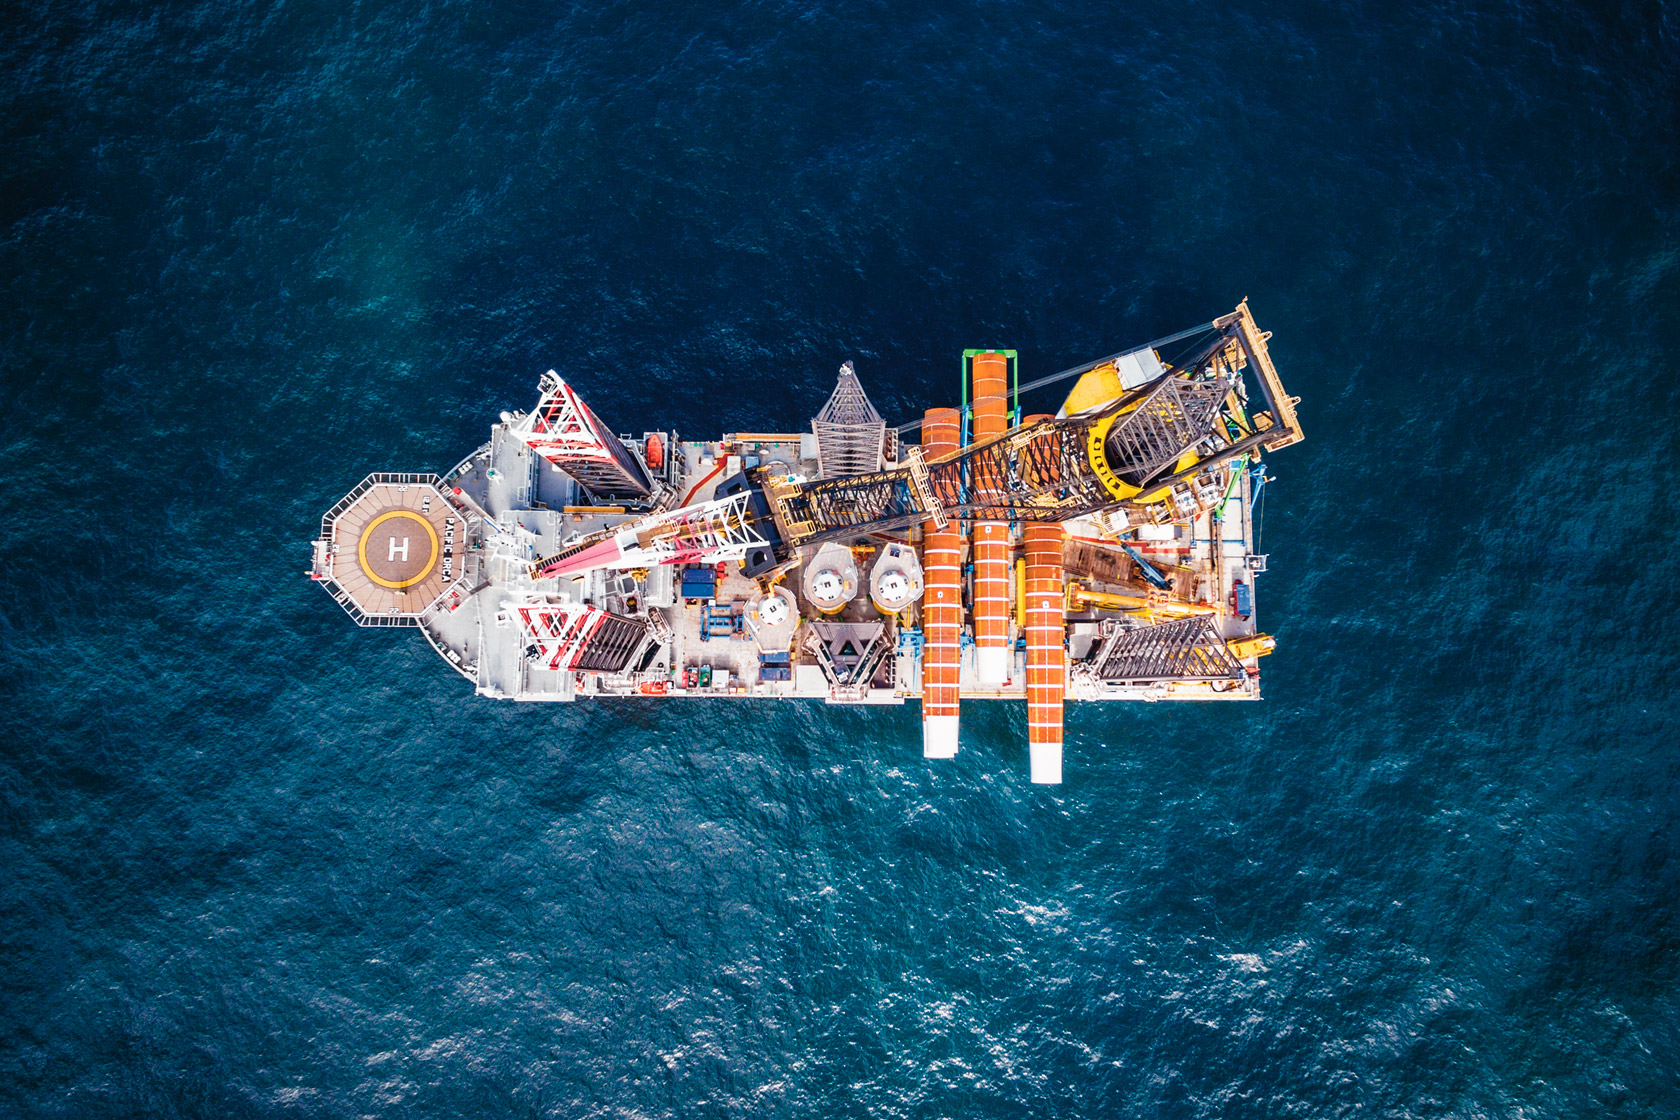 An installation vessel at Sandbank offshore wind farm viewed from above